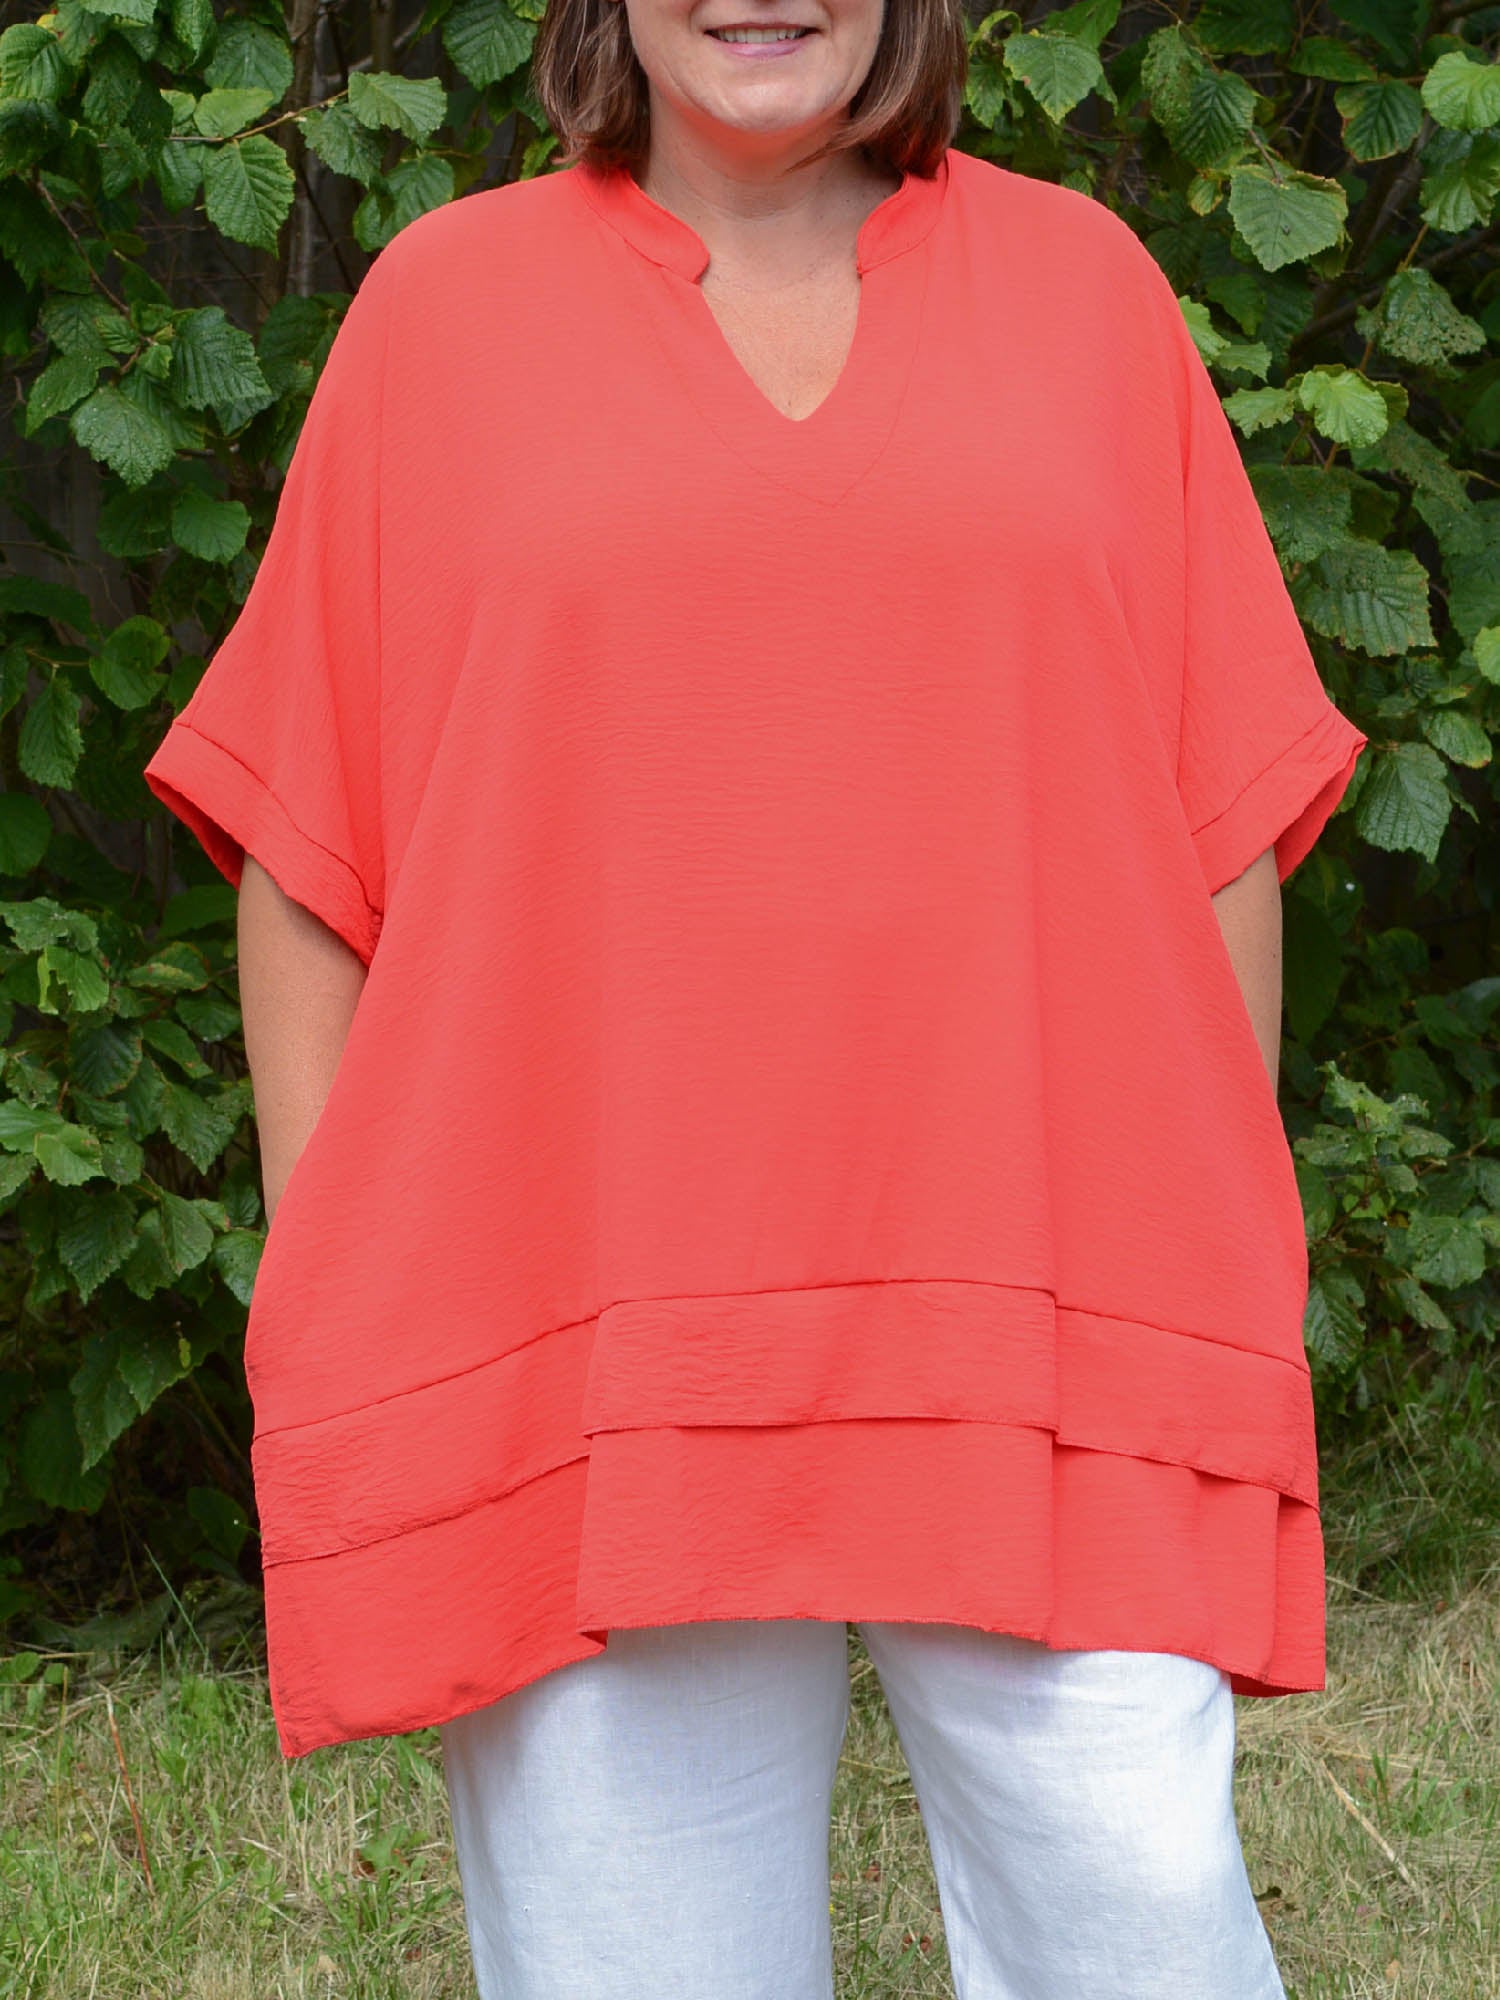 Oversized Lagenlook Tunic with pockets - TP1005, Tunic, Pure Plus Clothing, Lagenlook Clothing, Plus Size Fashion, Over 50 Fashion